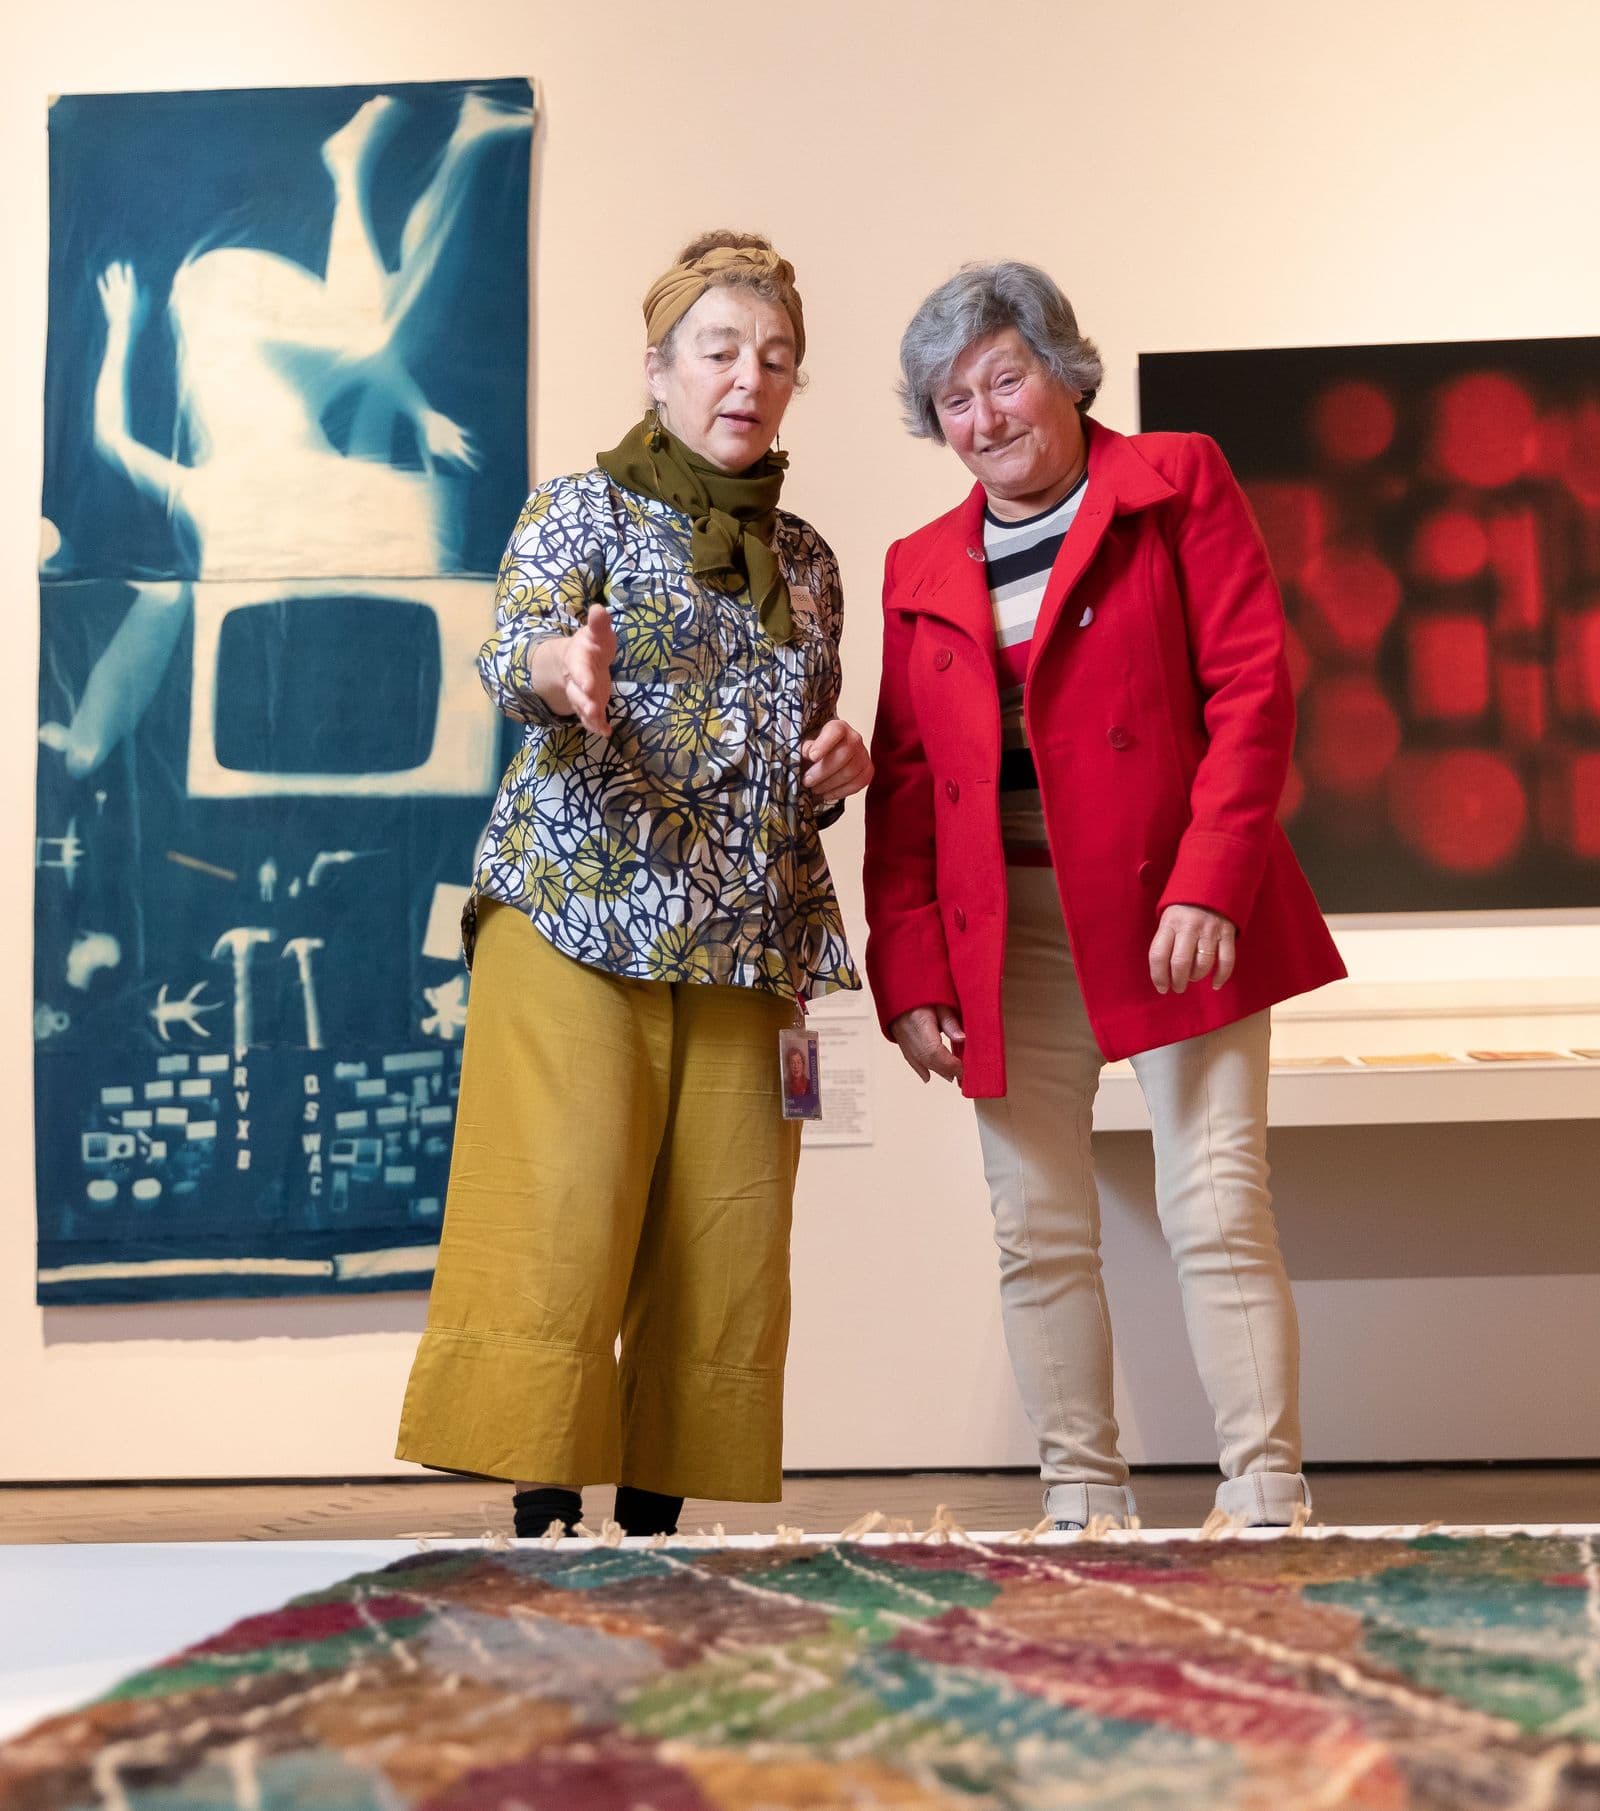 In a gallery one woman is pointing and describing a work of art to another woman